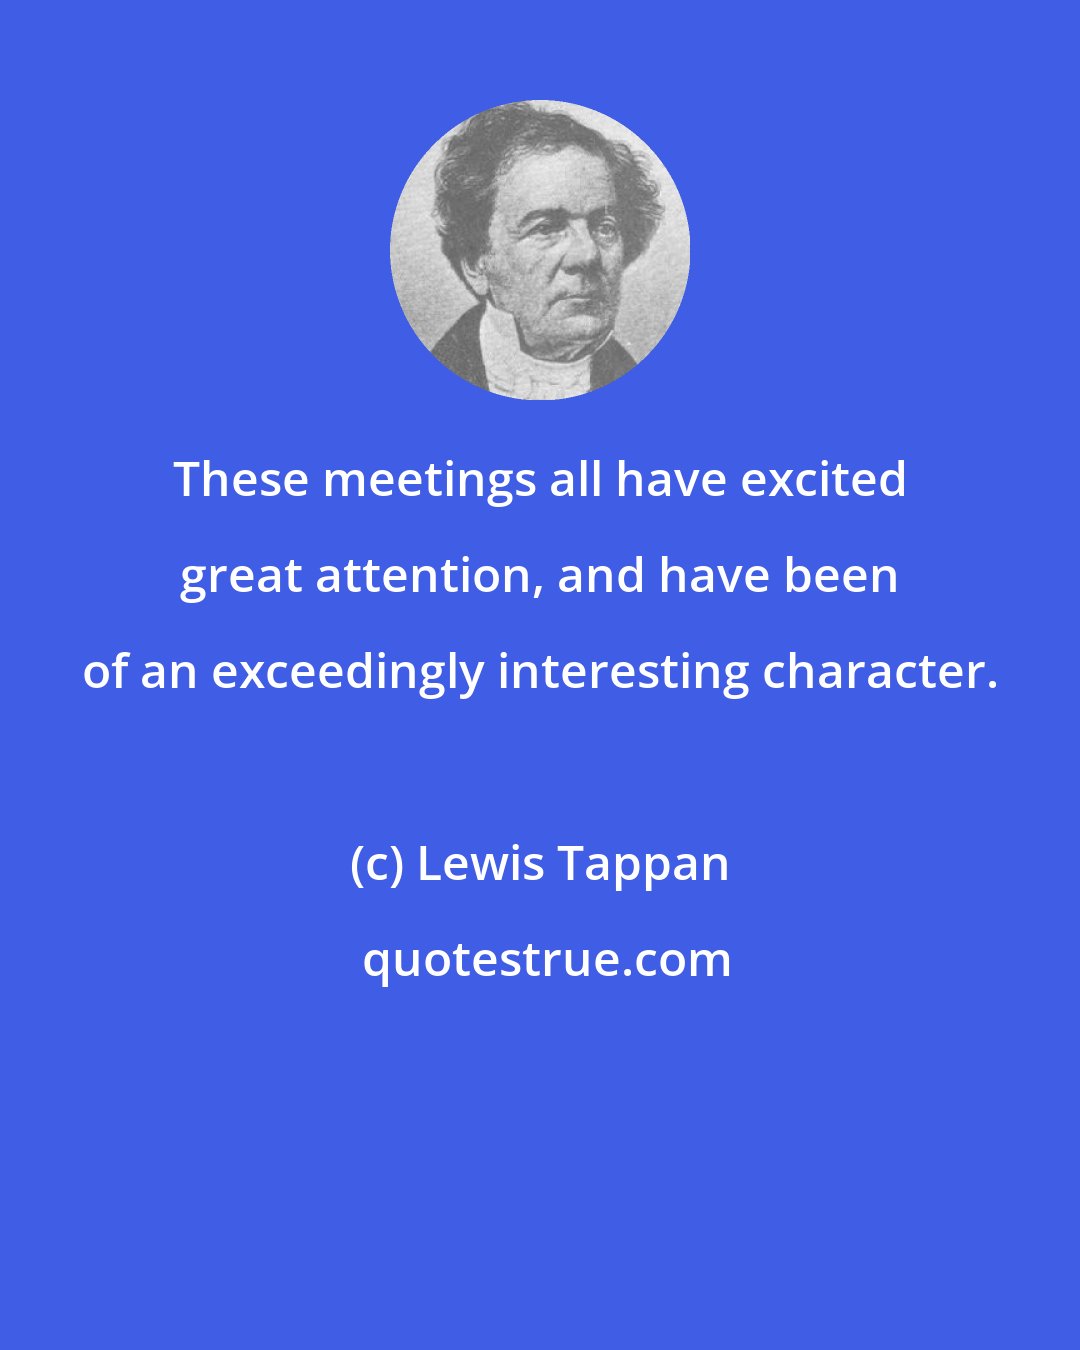 Lewis Tappan: These meetings all have excited great attention, and have been of an exceedingly interesting character.